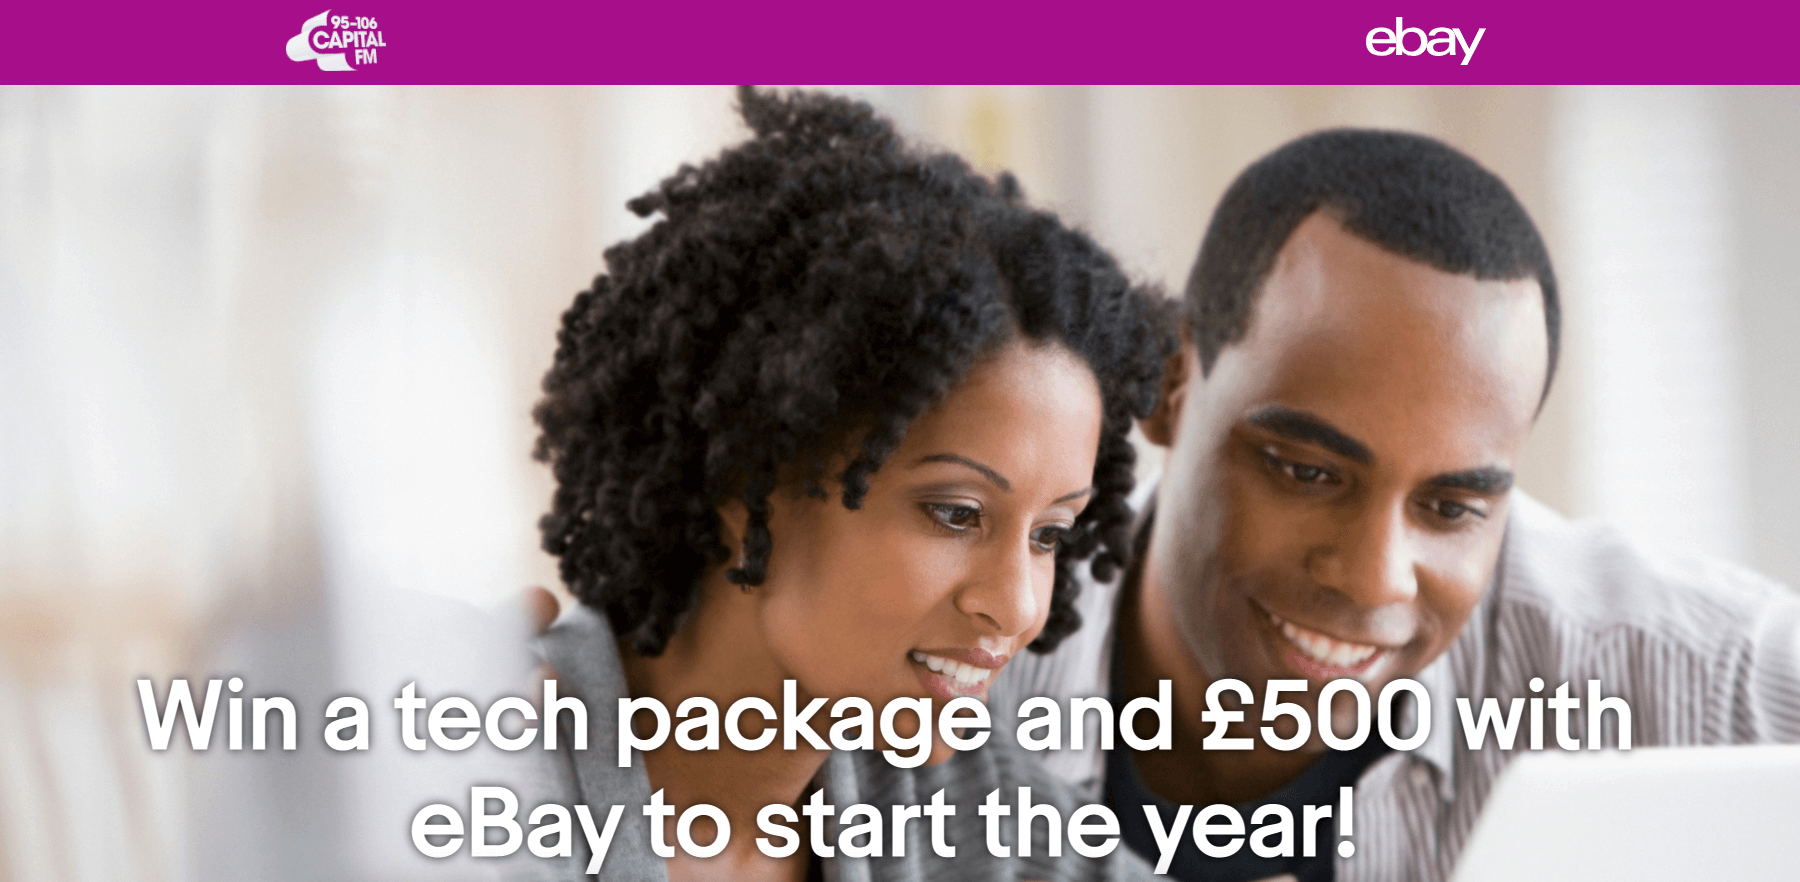 Win an iPhone XR, laptop and £500 with eBay from Capital FM